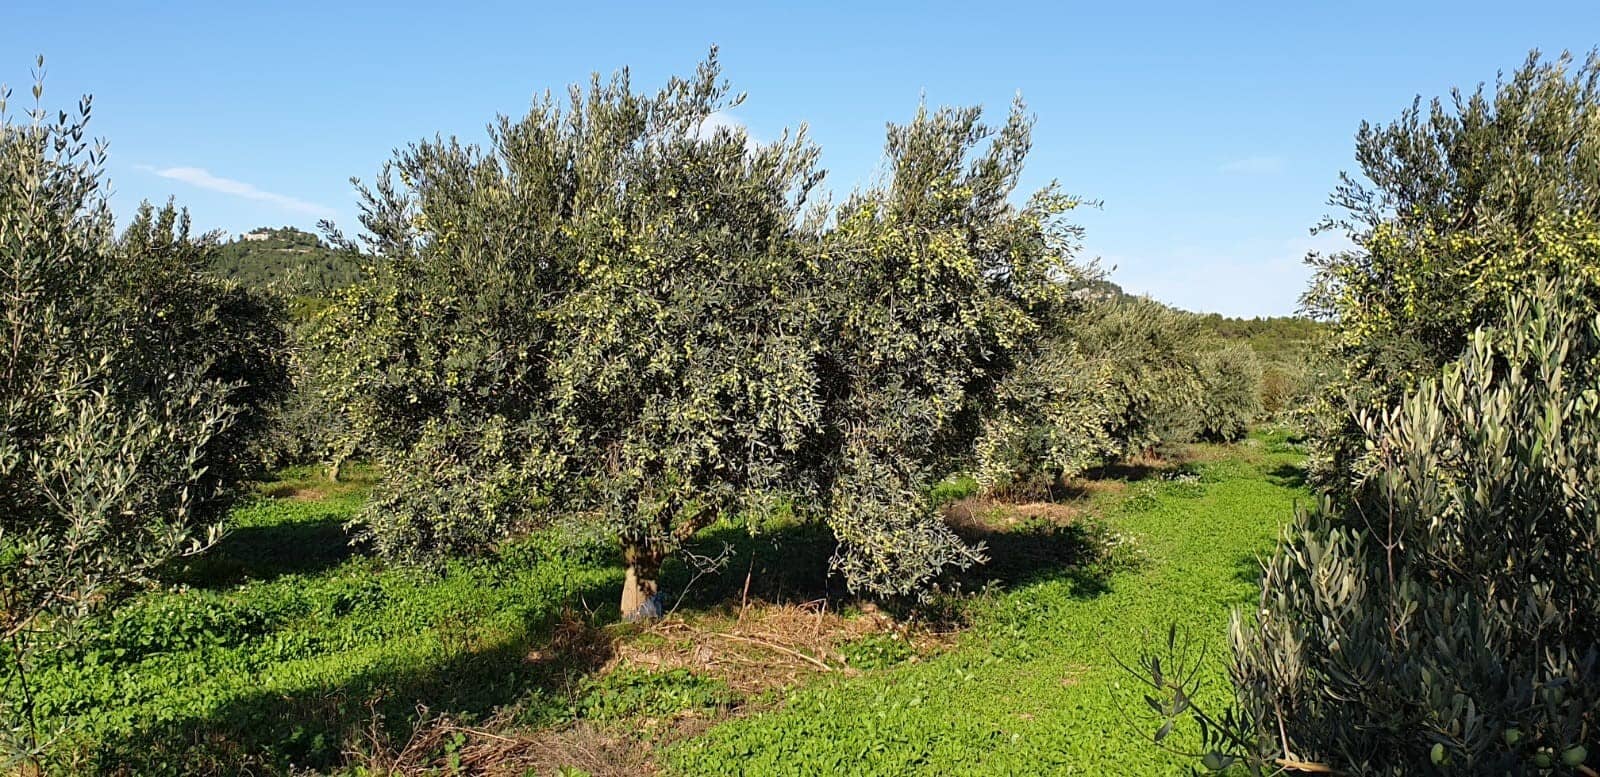 europe-profiles-the-best-olive-oils-production-a-family-trade-takes-root-at-moulin-de-la-coquille-olive-oil-times